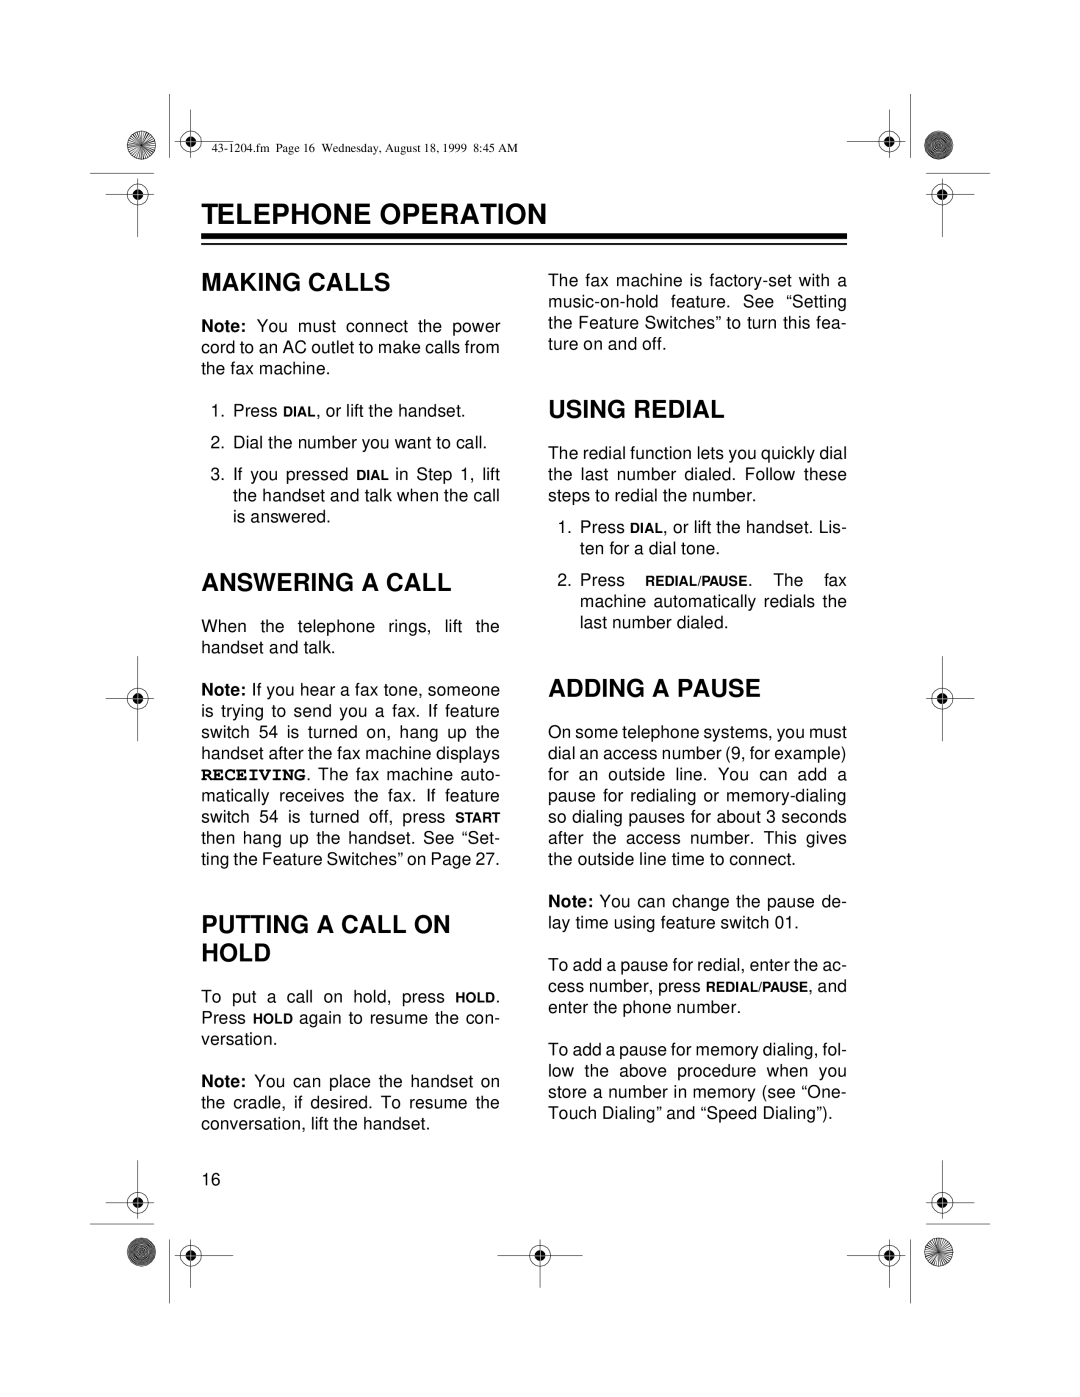 Radio Shack 43-1204 owner manual Telephone Operation, Making Calls, Answering A Call, Putting A Call On Hold, Using Redial 